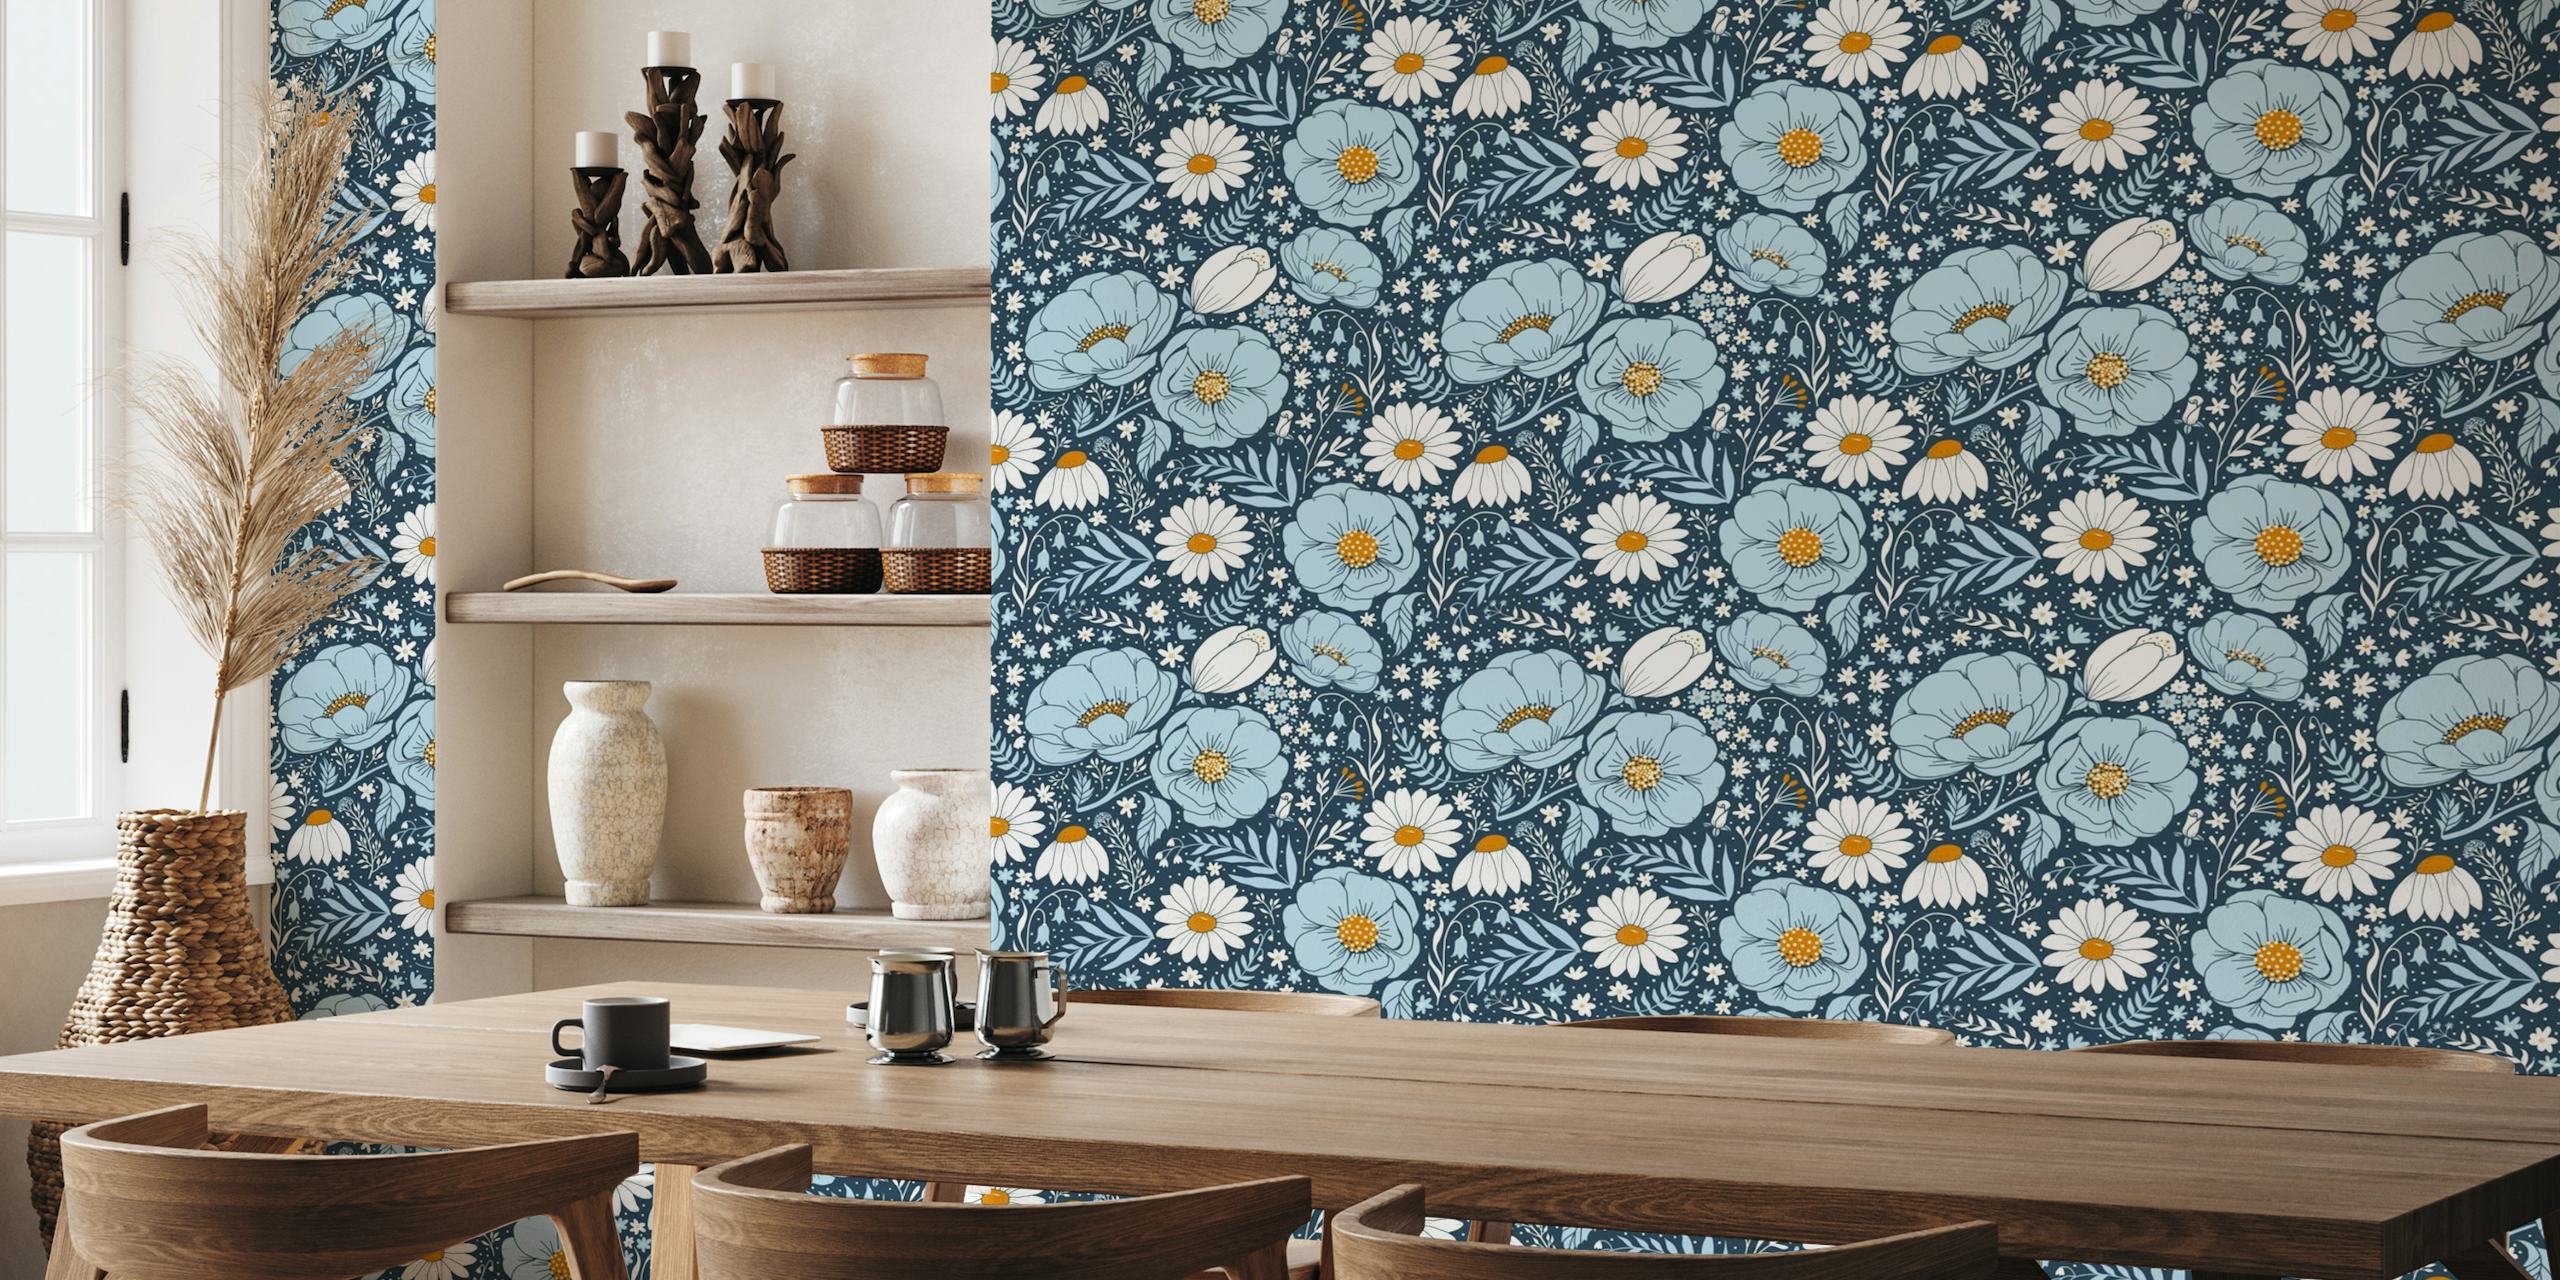 Blue and white flowers on navy blue behang